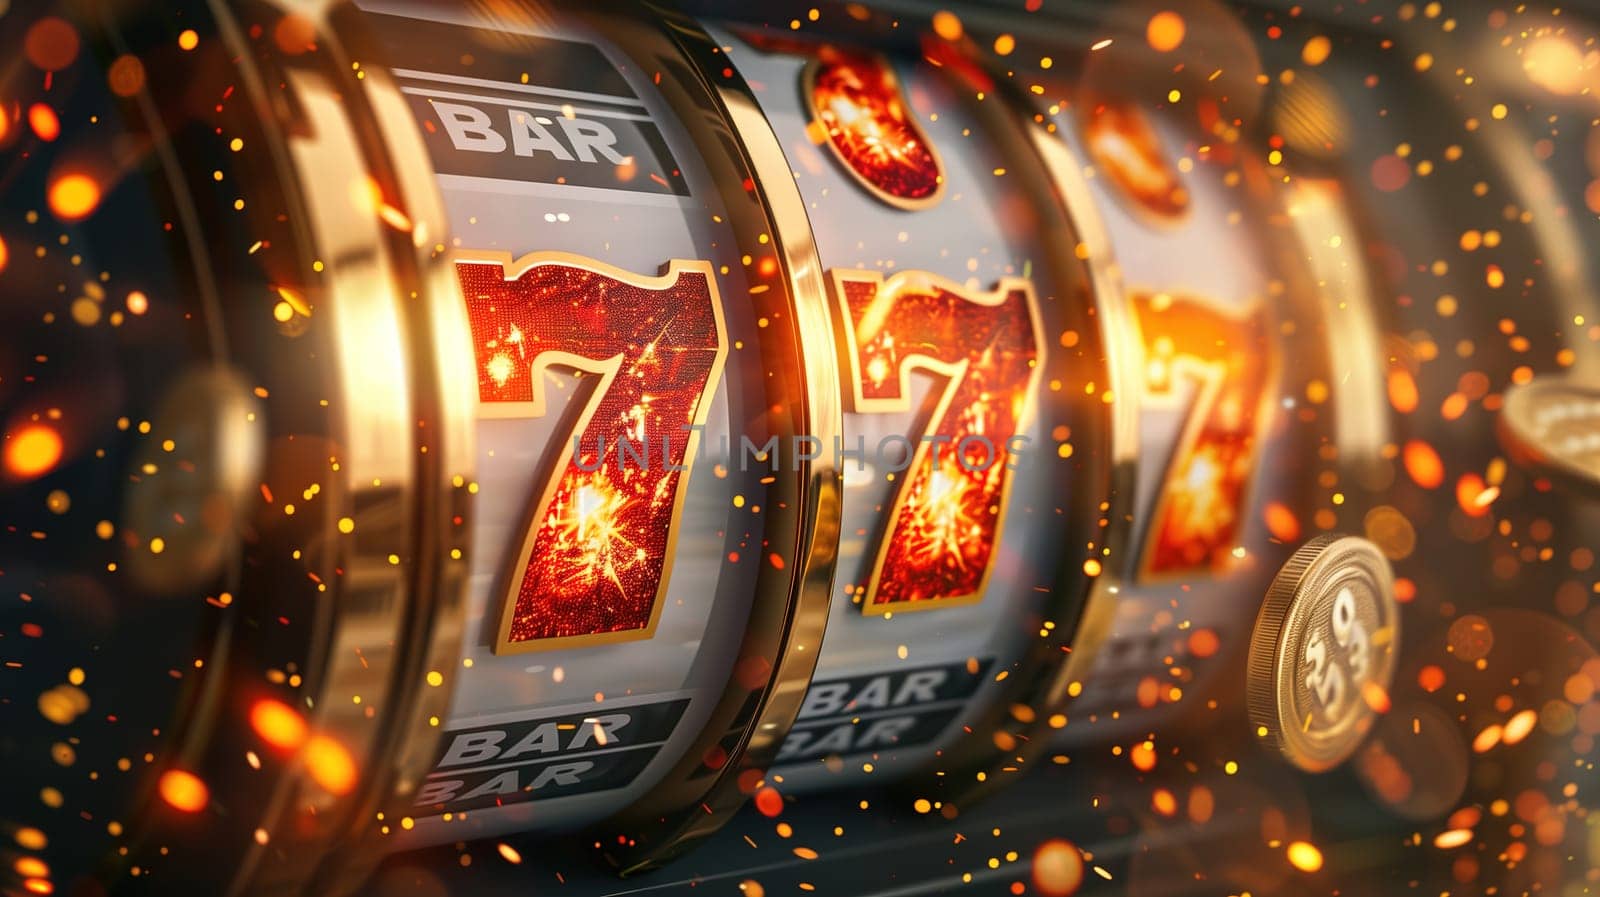 A vibrant close-up highlights the spinning reels of a slot machine as they align with the number seven, surrounded by golden sparkles suggesting a win. The fiery glow and shimmering lights create an atmosphere of excitement typically found in a bustling casino floor.